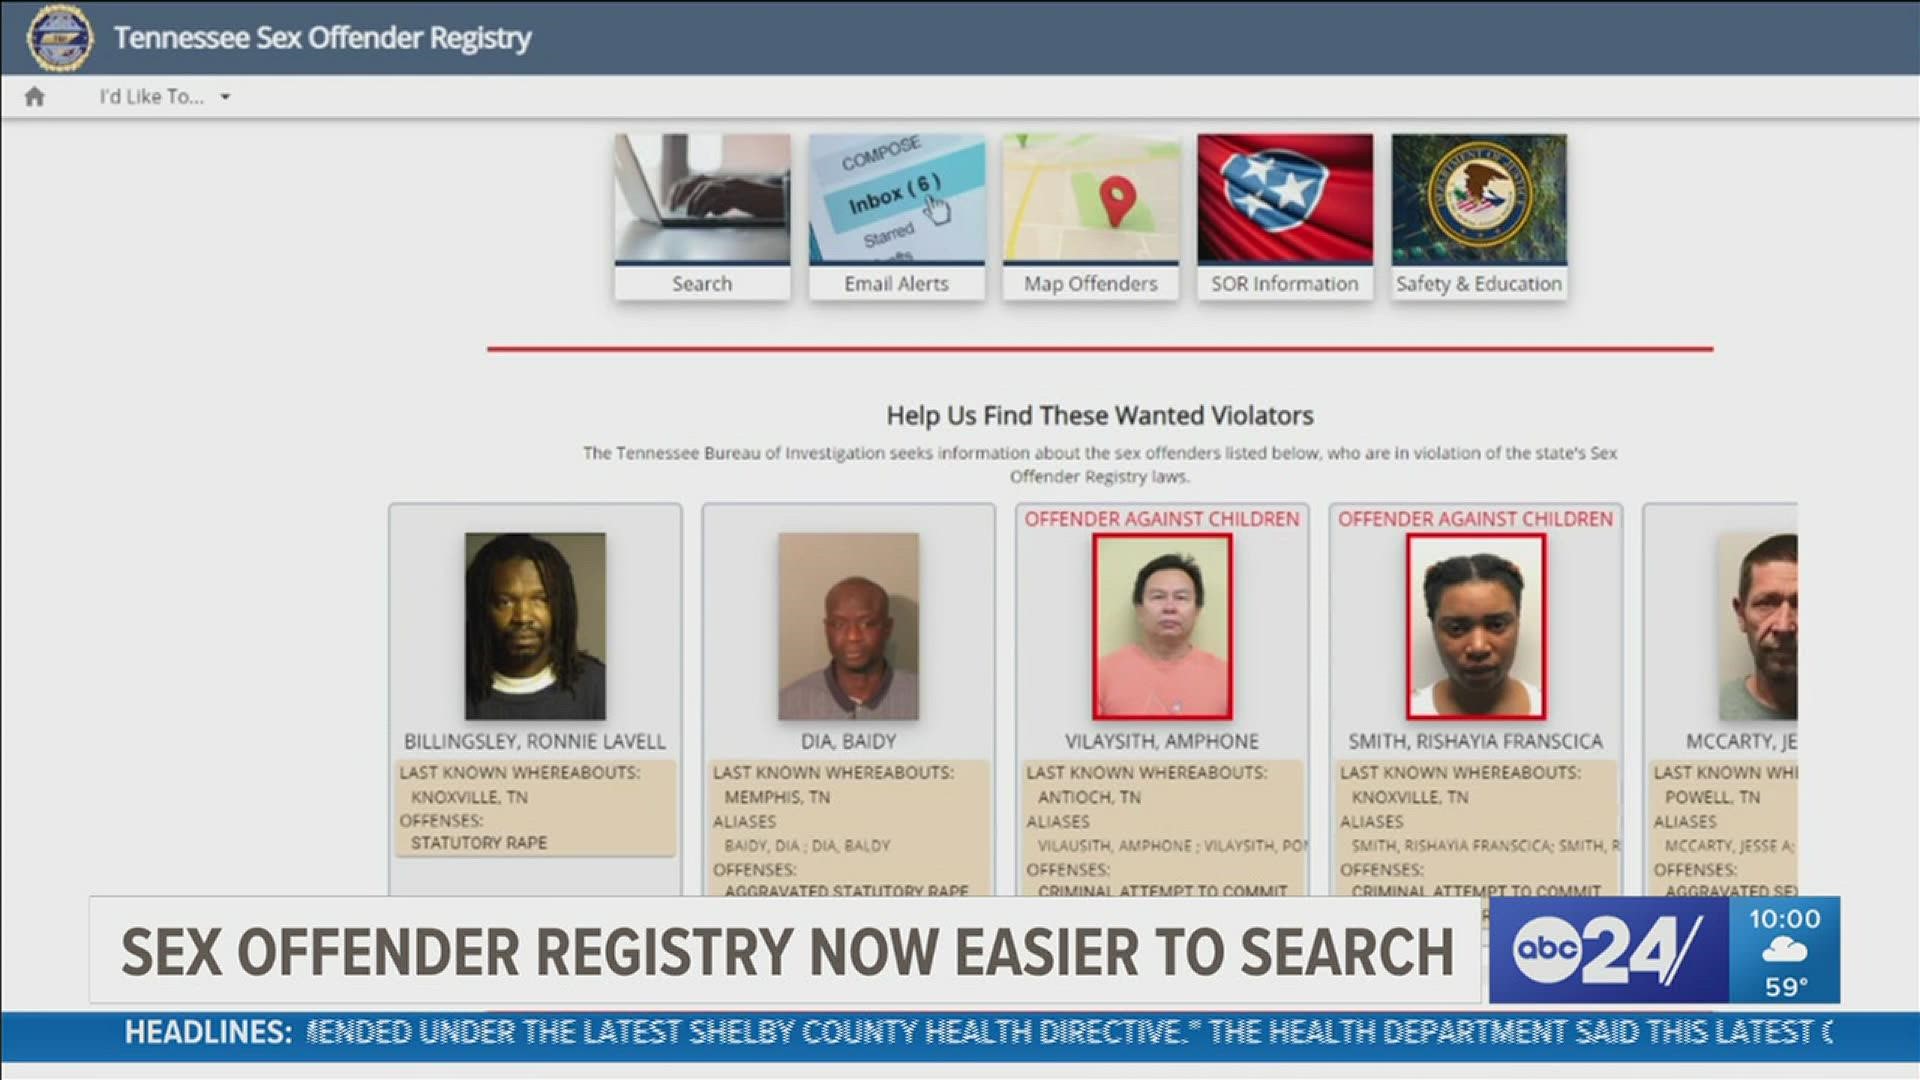 The TBI has updated the sex offender registry website so it's easier to search where registered offenders live near you